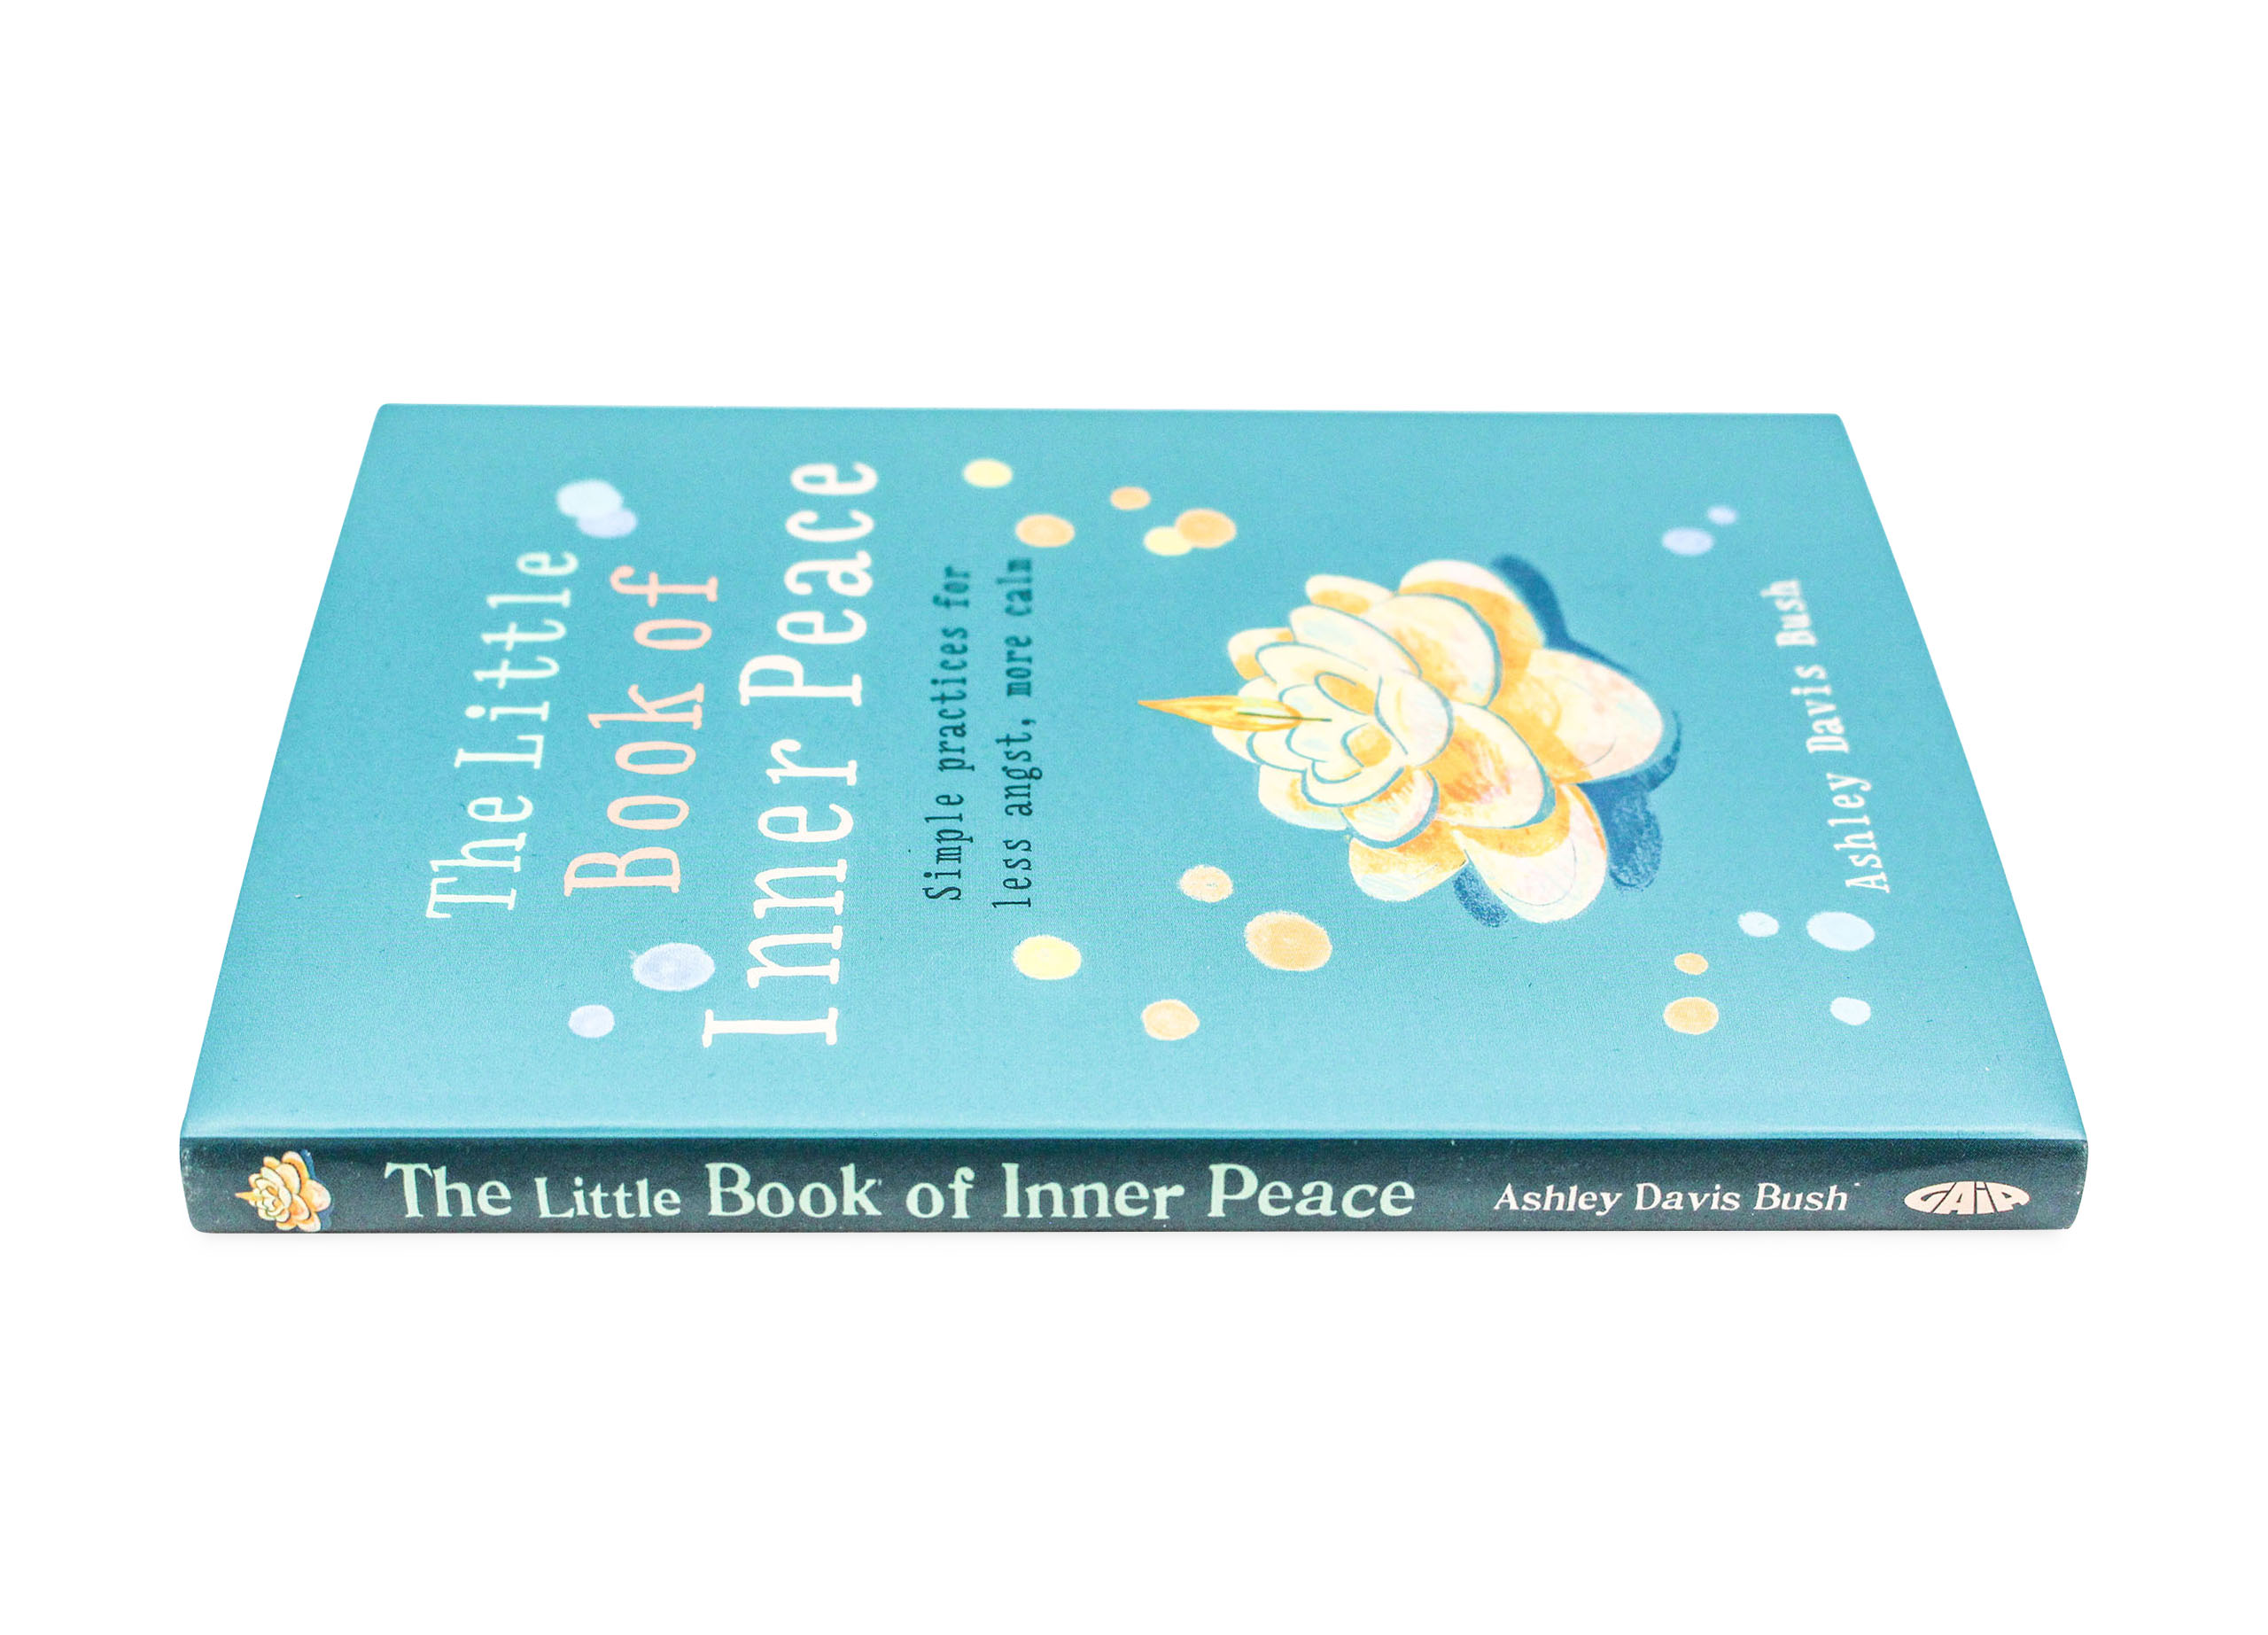 Little Book of Inner Peace: Simple practices for less angst, more calm -Crystal Dreams